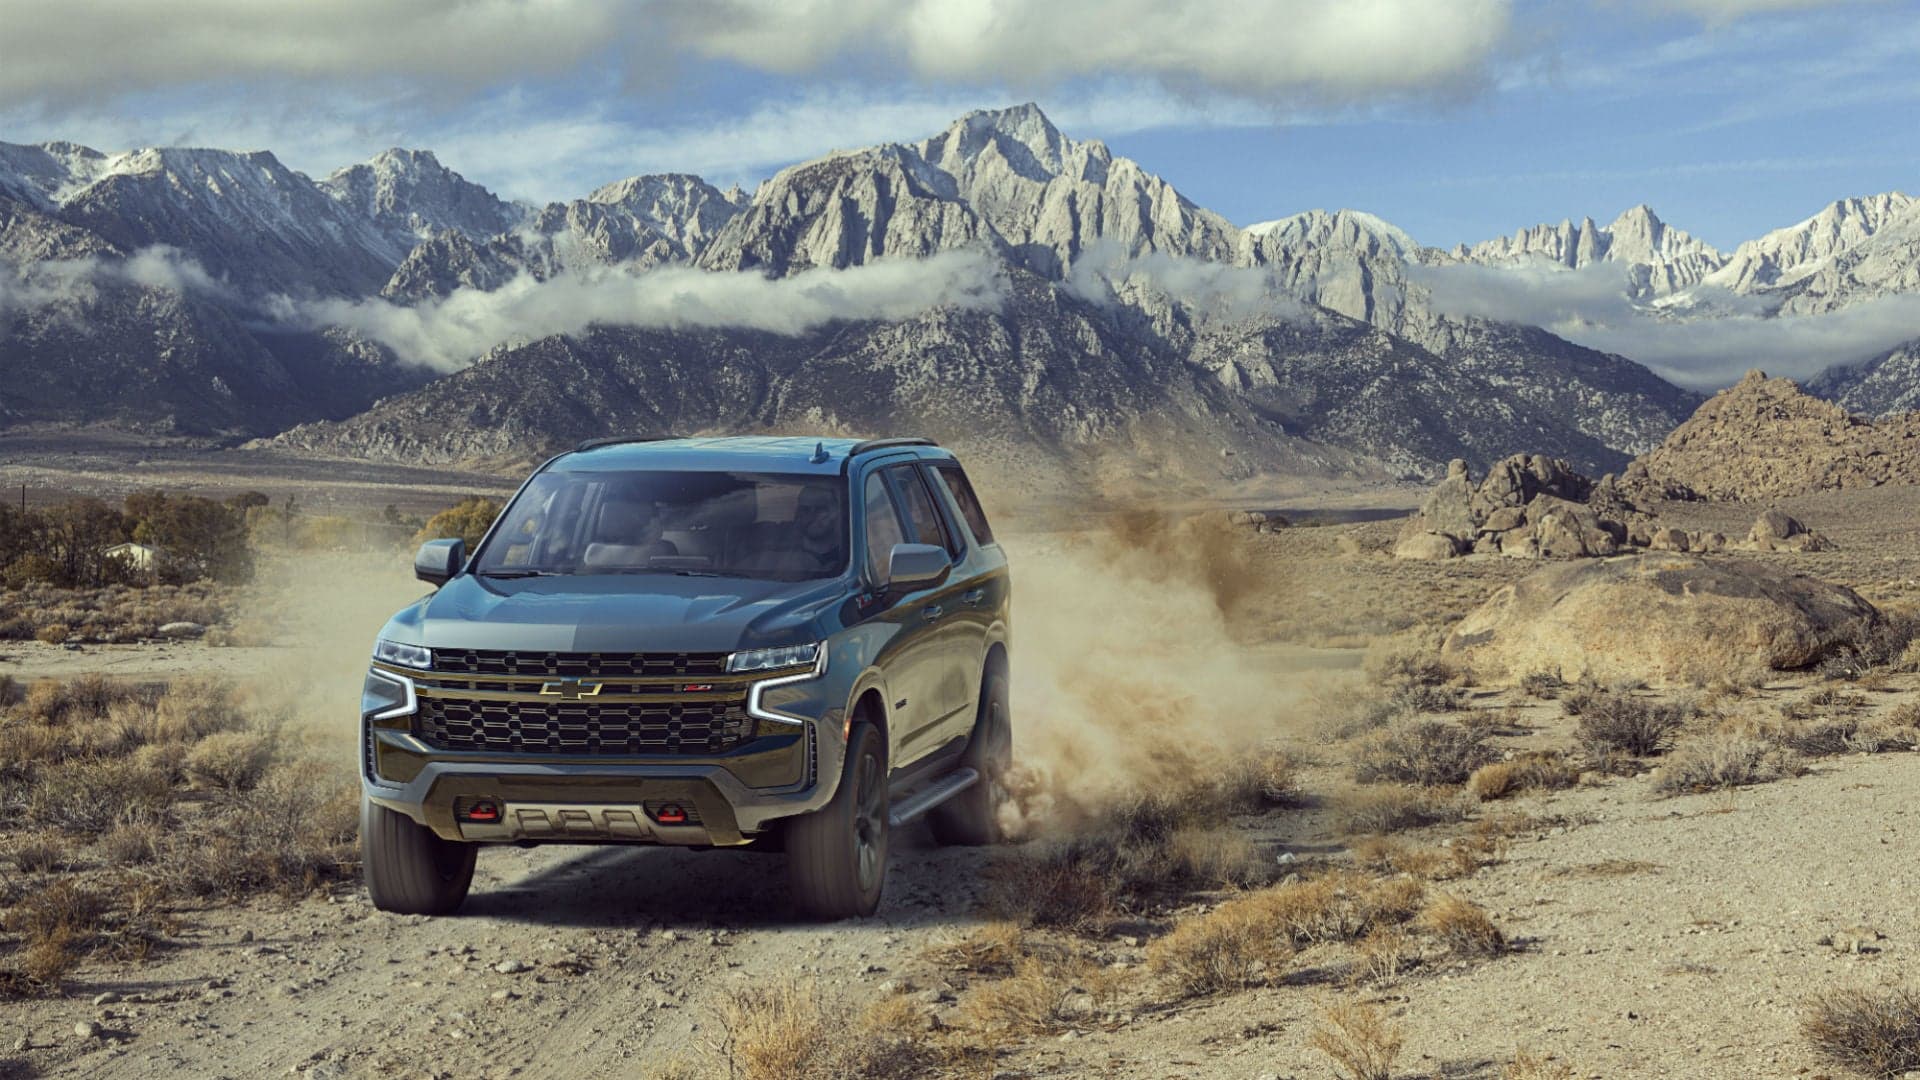 Chevy Will Sell You a Side-Dump Exhaust and Brembo Brakes For Your 2021 Tahoe or Suburban